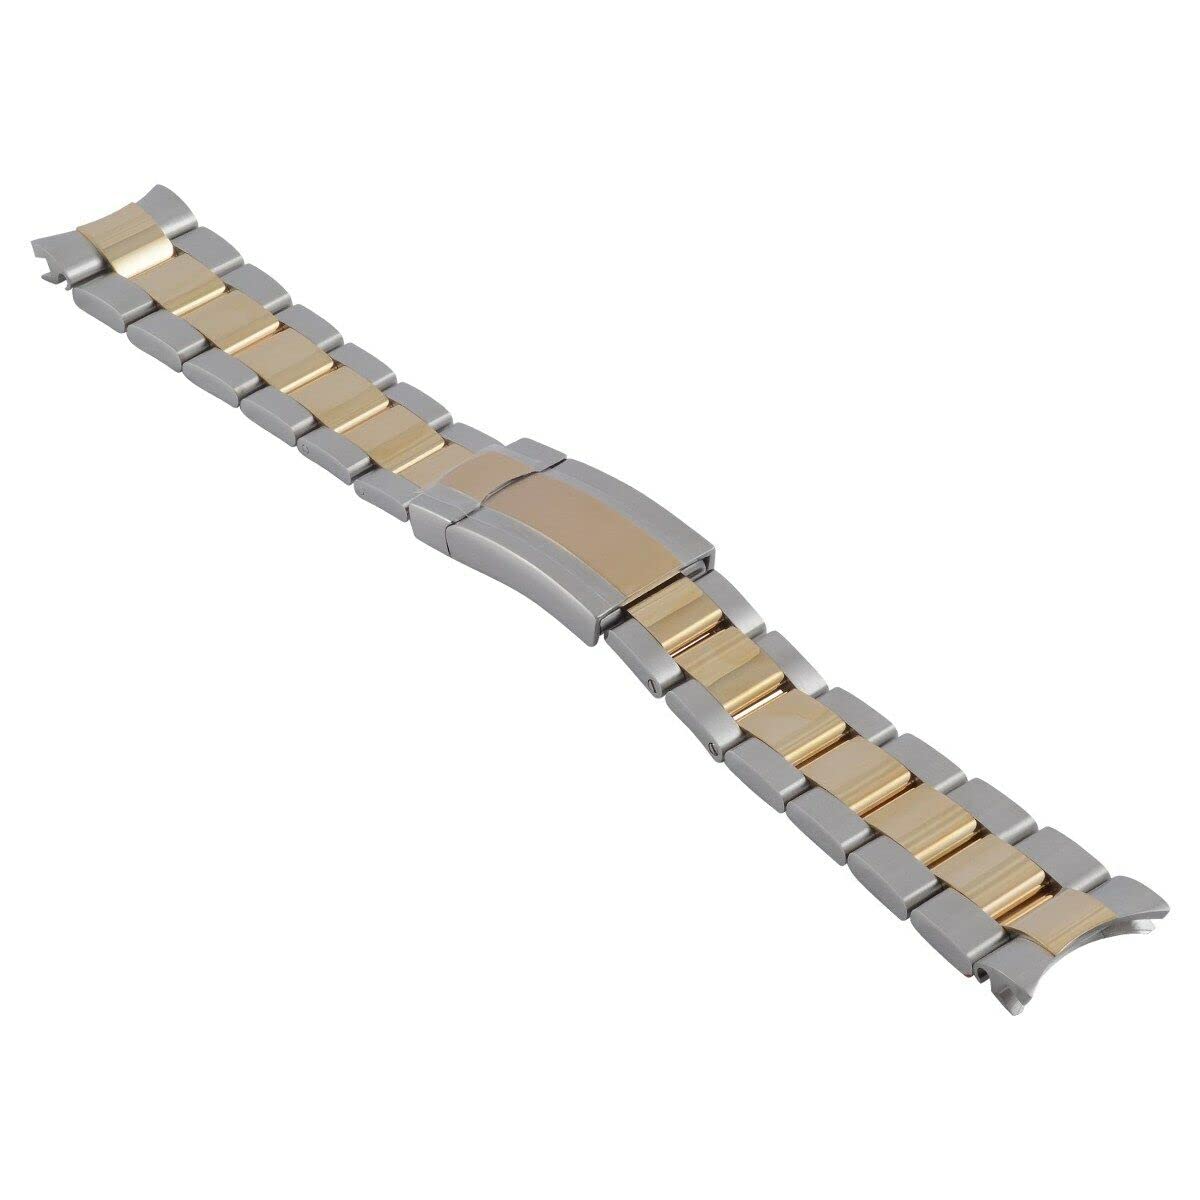 Ewatchparts 20MM 14K GOLD TWO TONE OYSTER WATCH BAND COMPATIBLE WITH ROLEX SUBMARINER 116613 116613LB FL